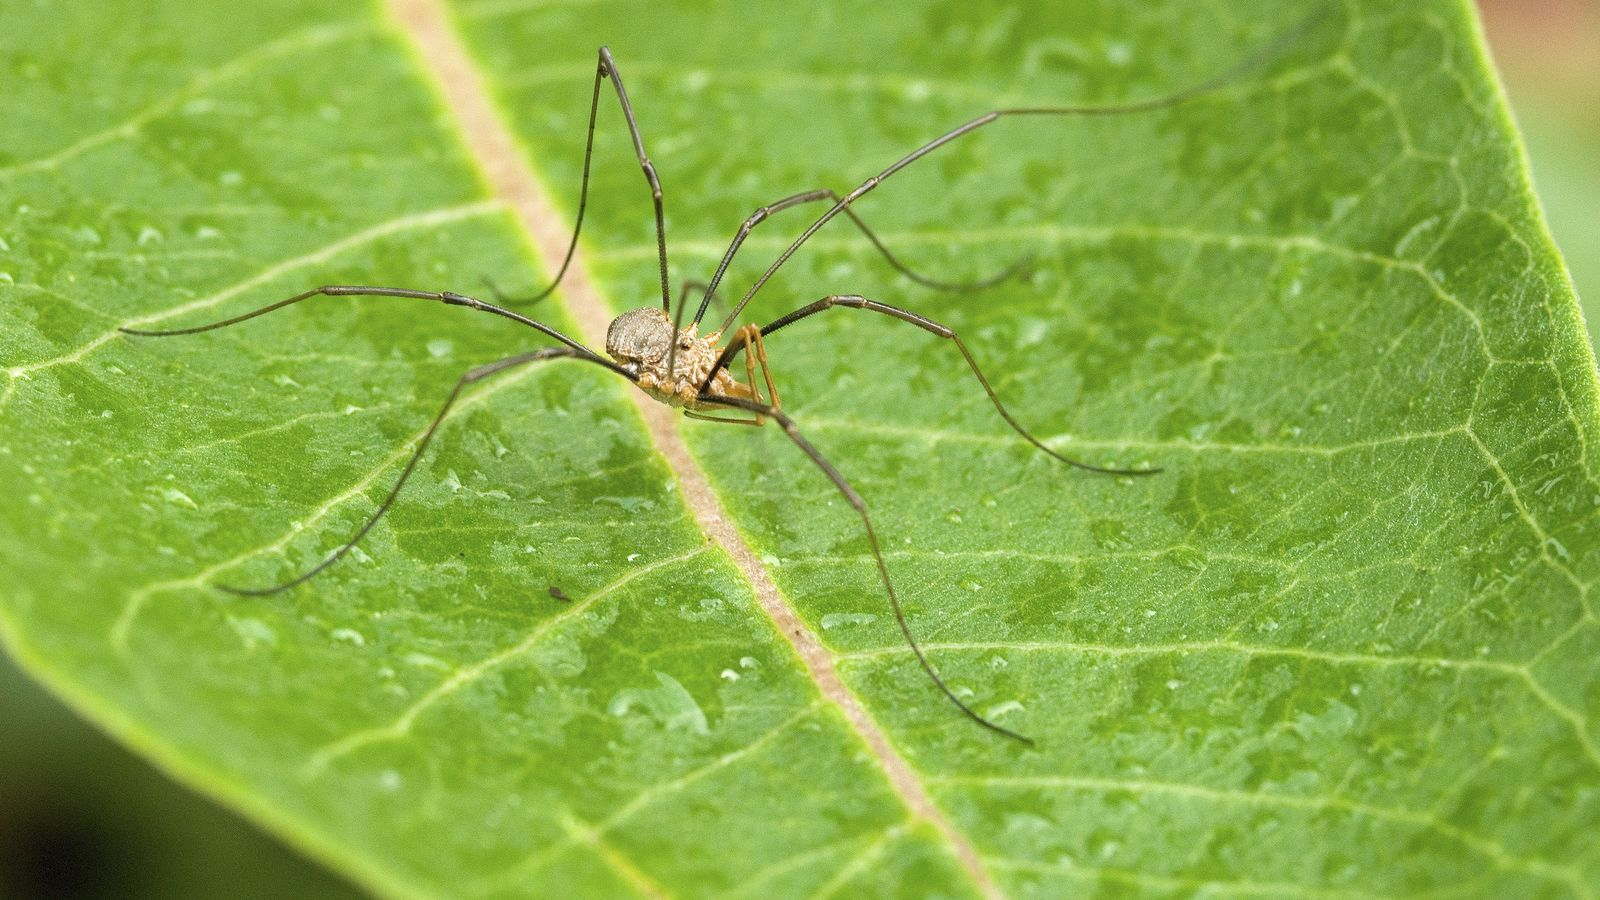 Daddy longlegs (Common names for this Order are daddy-longlegs, harvestmen and opilionidi), photographed on a leaf. Photo © The Nature Conservancy (Chris Helzer)